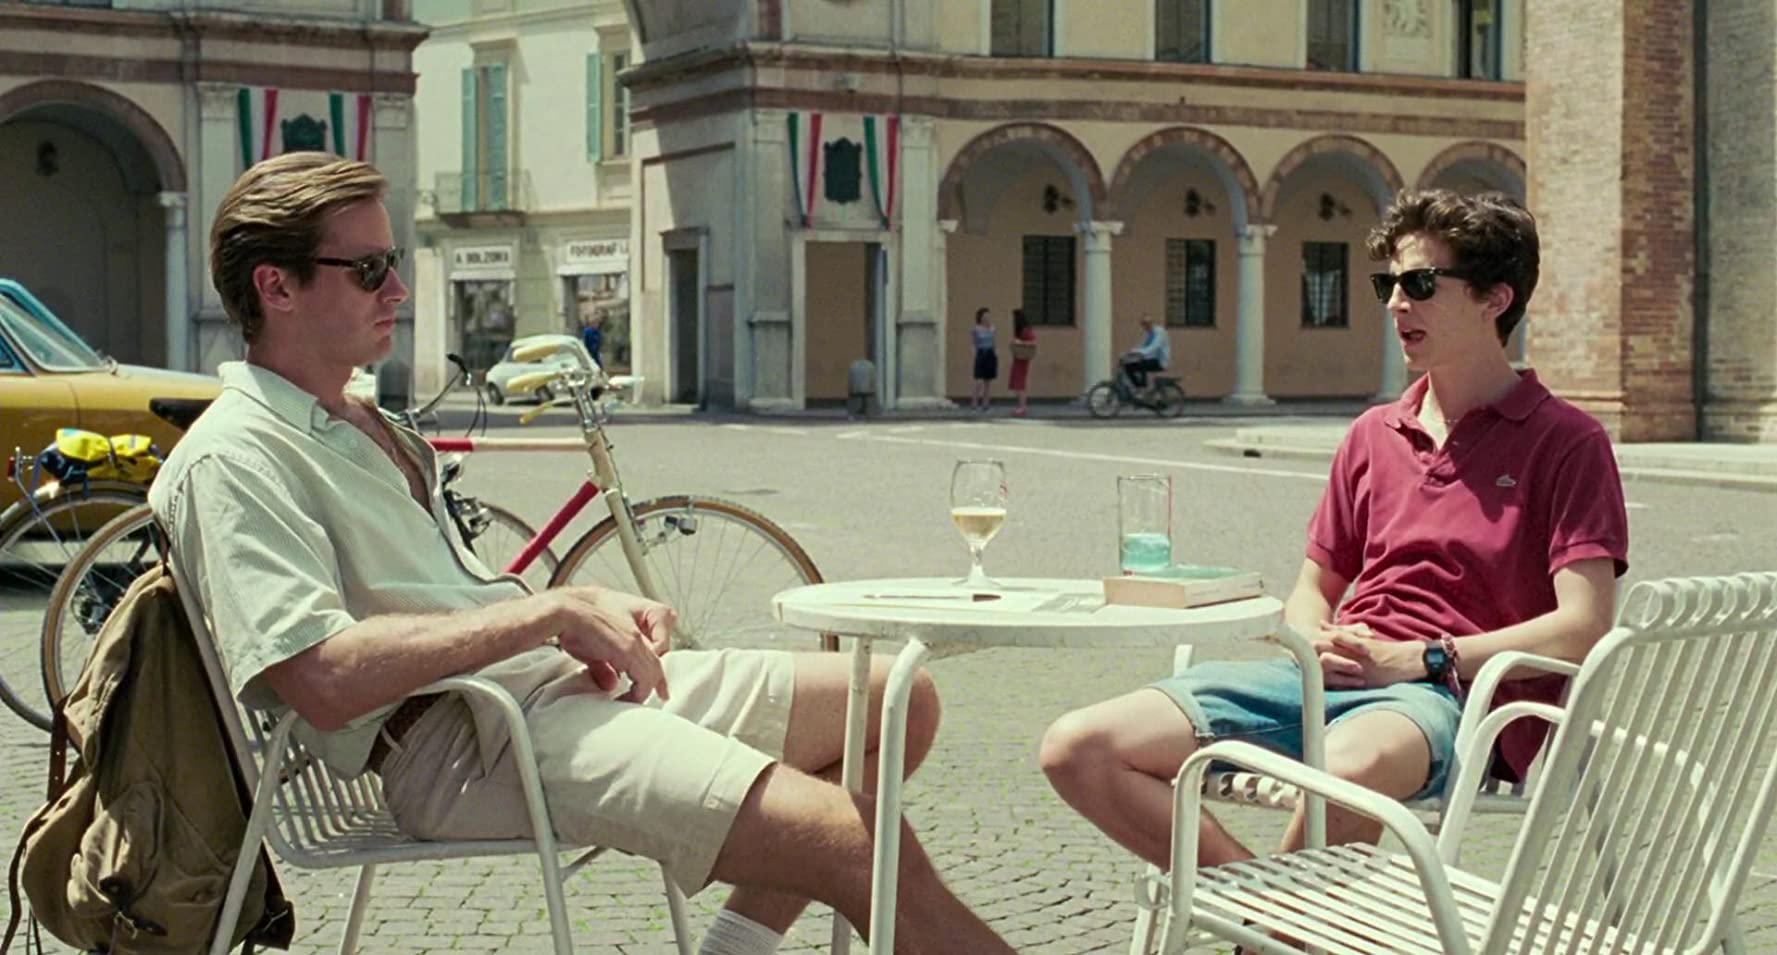 Armie Hammer and Timothée Chalamet in Call Me by Your Name (2017)